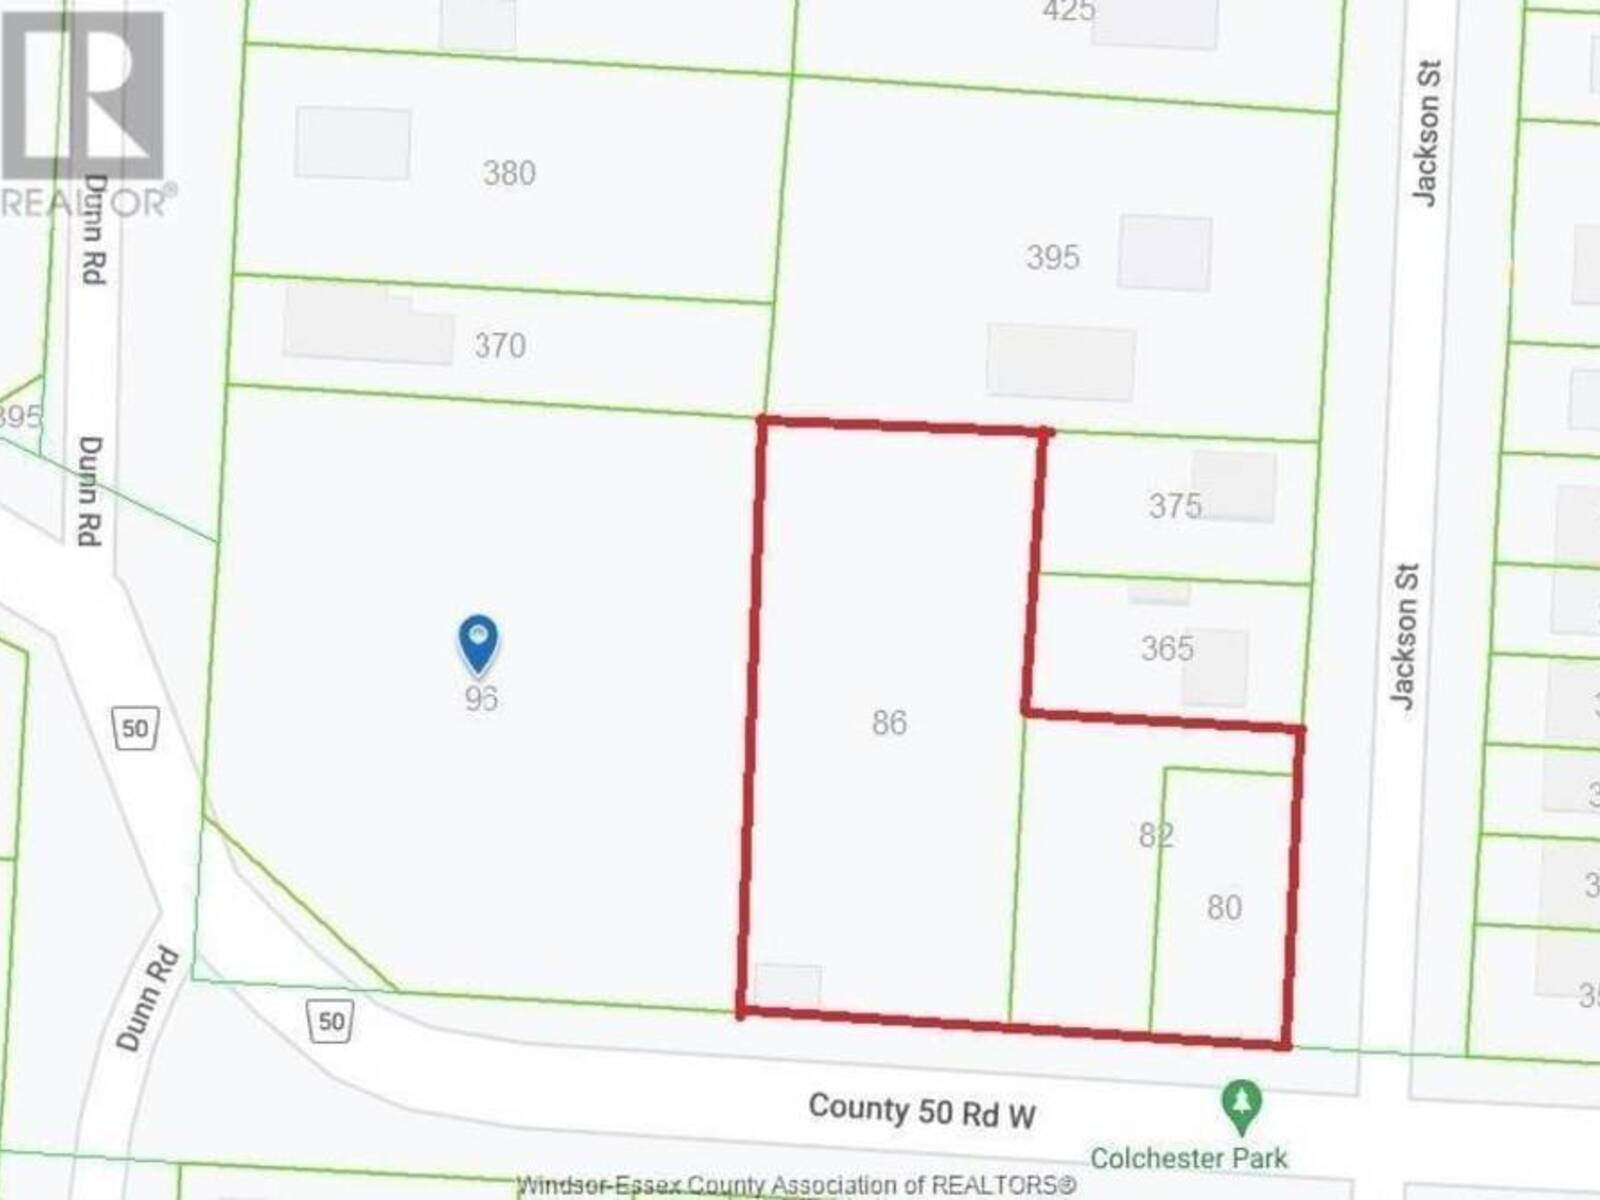 80-82-86 COUNTY ROAD 50, Colchester South, Ontario N0R 1G0